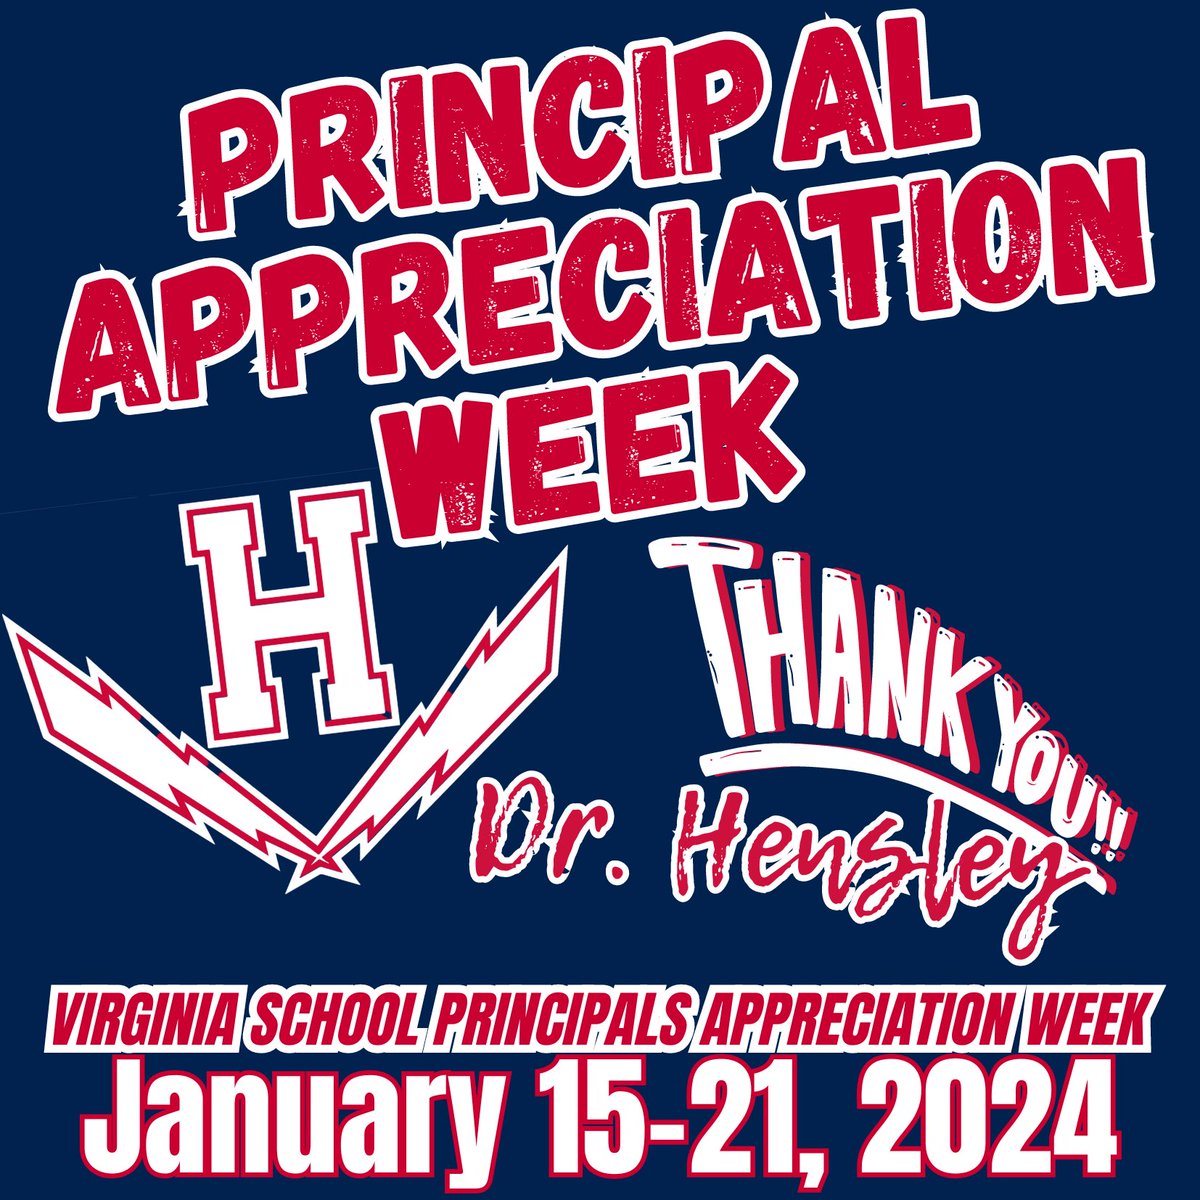 A special thank you to our @HarrisonburgHS Principal, @_MelissaHensley , as VA Principal Appreciation Week concludes!